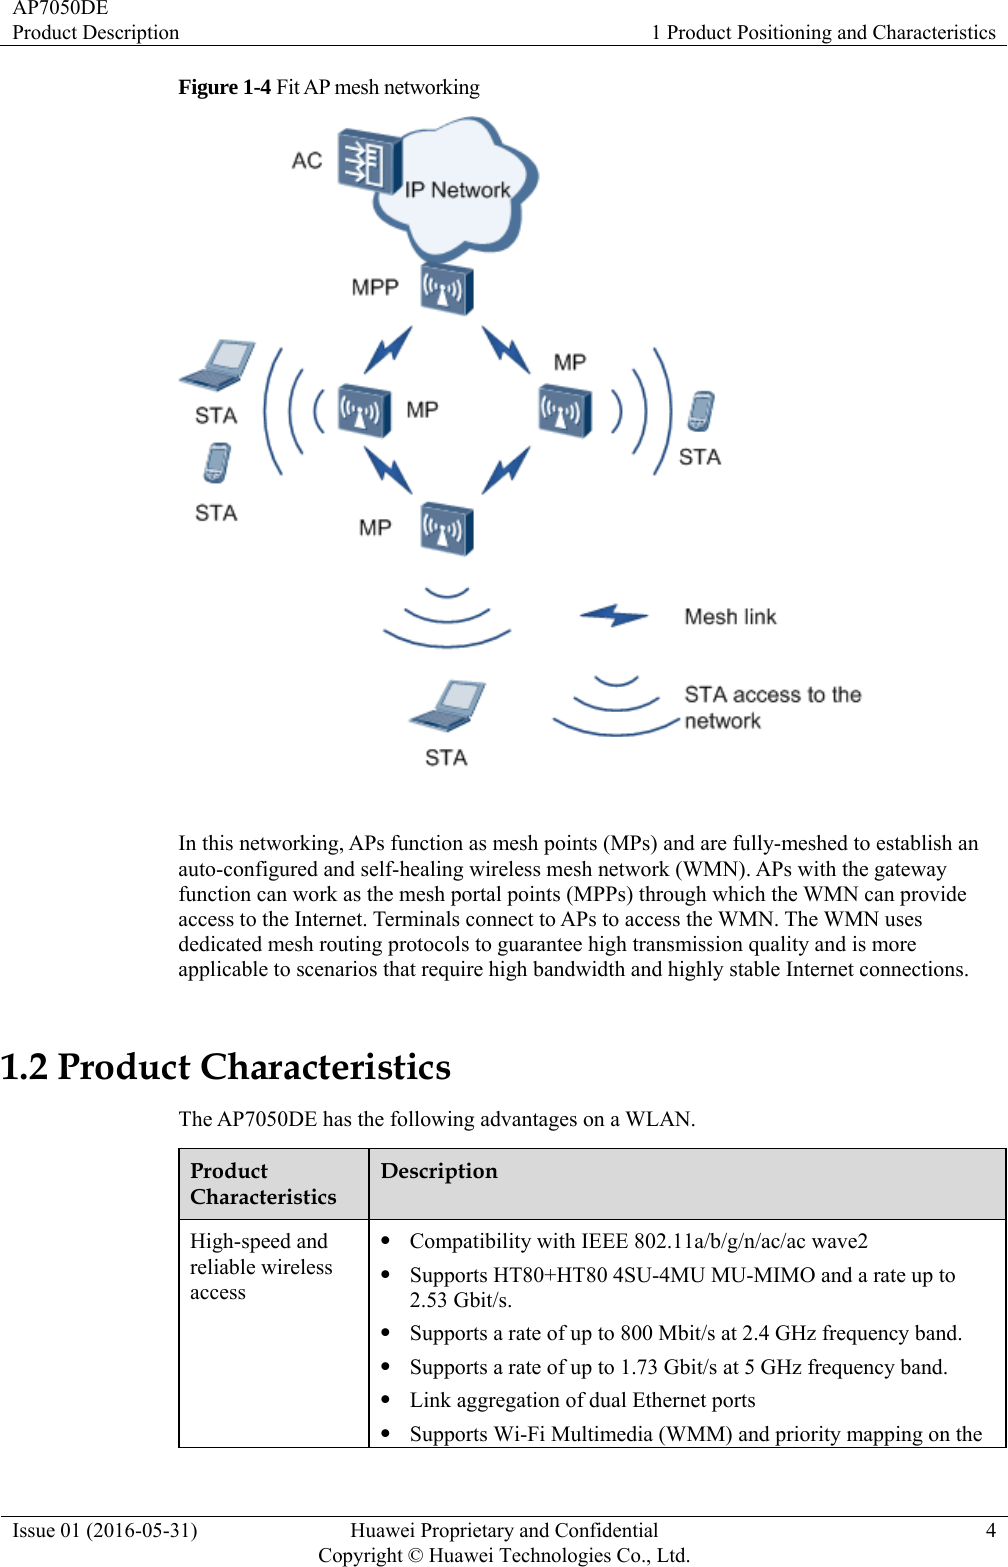 AP7050DE Product Description  1 Product Positioning and Characteristics Issue 01 (2016-05-31)  Huawei Proprietary and Confidential         Copyright © Huawei Technologies Co., Ltd.4 Figure 1-4 Fit AP mesh networking   In this networking, APs function as mesh points (MPs) and are fully-meshed to establish an auto-configured and self-healing wireless mesh network (WMN). APs with the gateway function can work as the mesh portal points (MPPs) through which the WMN can provide access to the Internet. Terminals connect to APs to access the WMN. The WMN uses dedicated mesh routing protocols to guarantee high transmission quality and is more applicable to scenarios that require high bandwidth and highly stable Internet connections. 1.2 Product Characteristics The AP7050DE has the following advantages on a WLAN. Product Characteristics Description High-speed and reliable wireless access  Compatibility with IEEE 802.11a/b/g/n/ac/ac wave2  Supports HT80+HT80 4SU-4MU MU-MIMO and a rate up to 2.53 Gbit/s.  Supports a rate of up to 800 Mbit/s at 2.4 GHz frequency band.  Supports a rate of up to 1.73 Gbit/s at 5 GHz frequency band.  Link aggregation of dual Ethernet ports  Supports Wi-Fi Multimedia (WMM) and priority mapping on the 